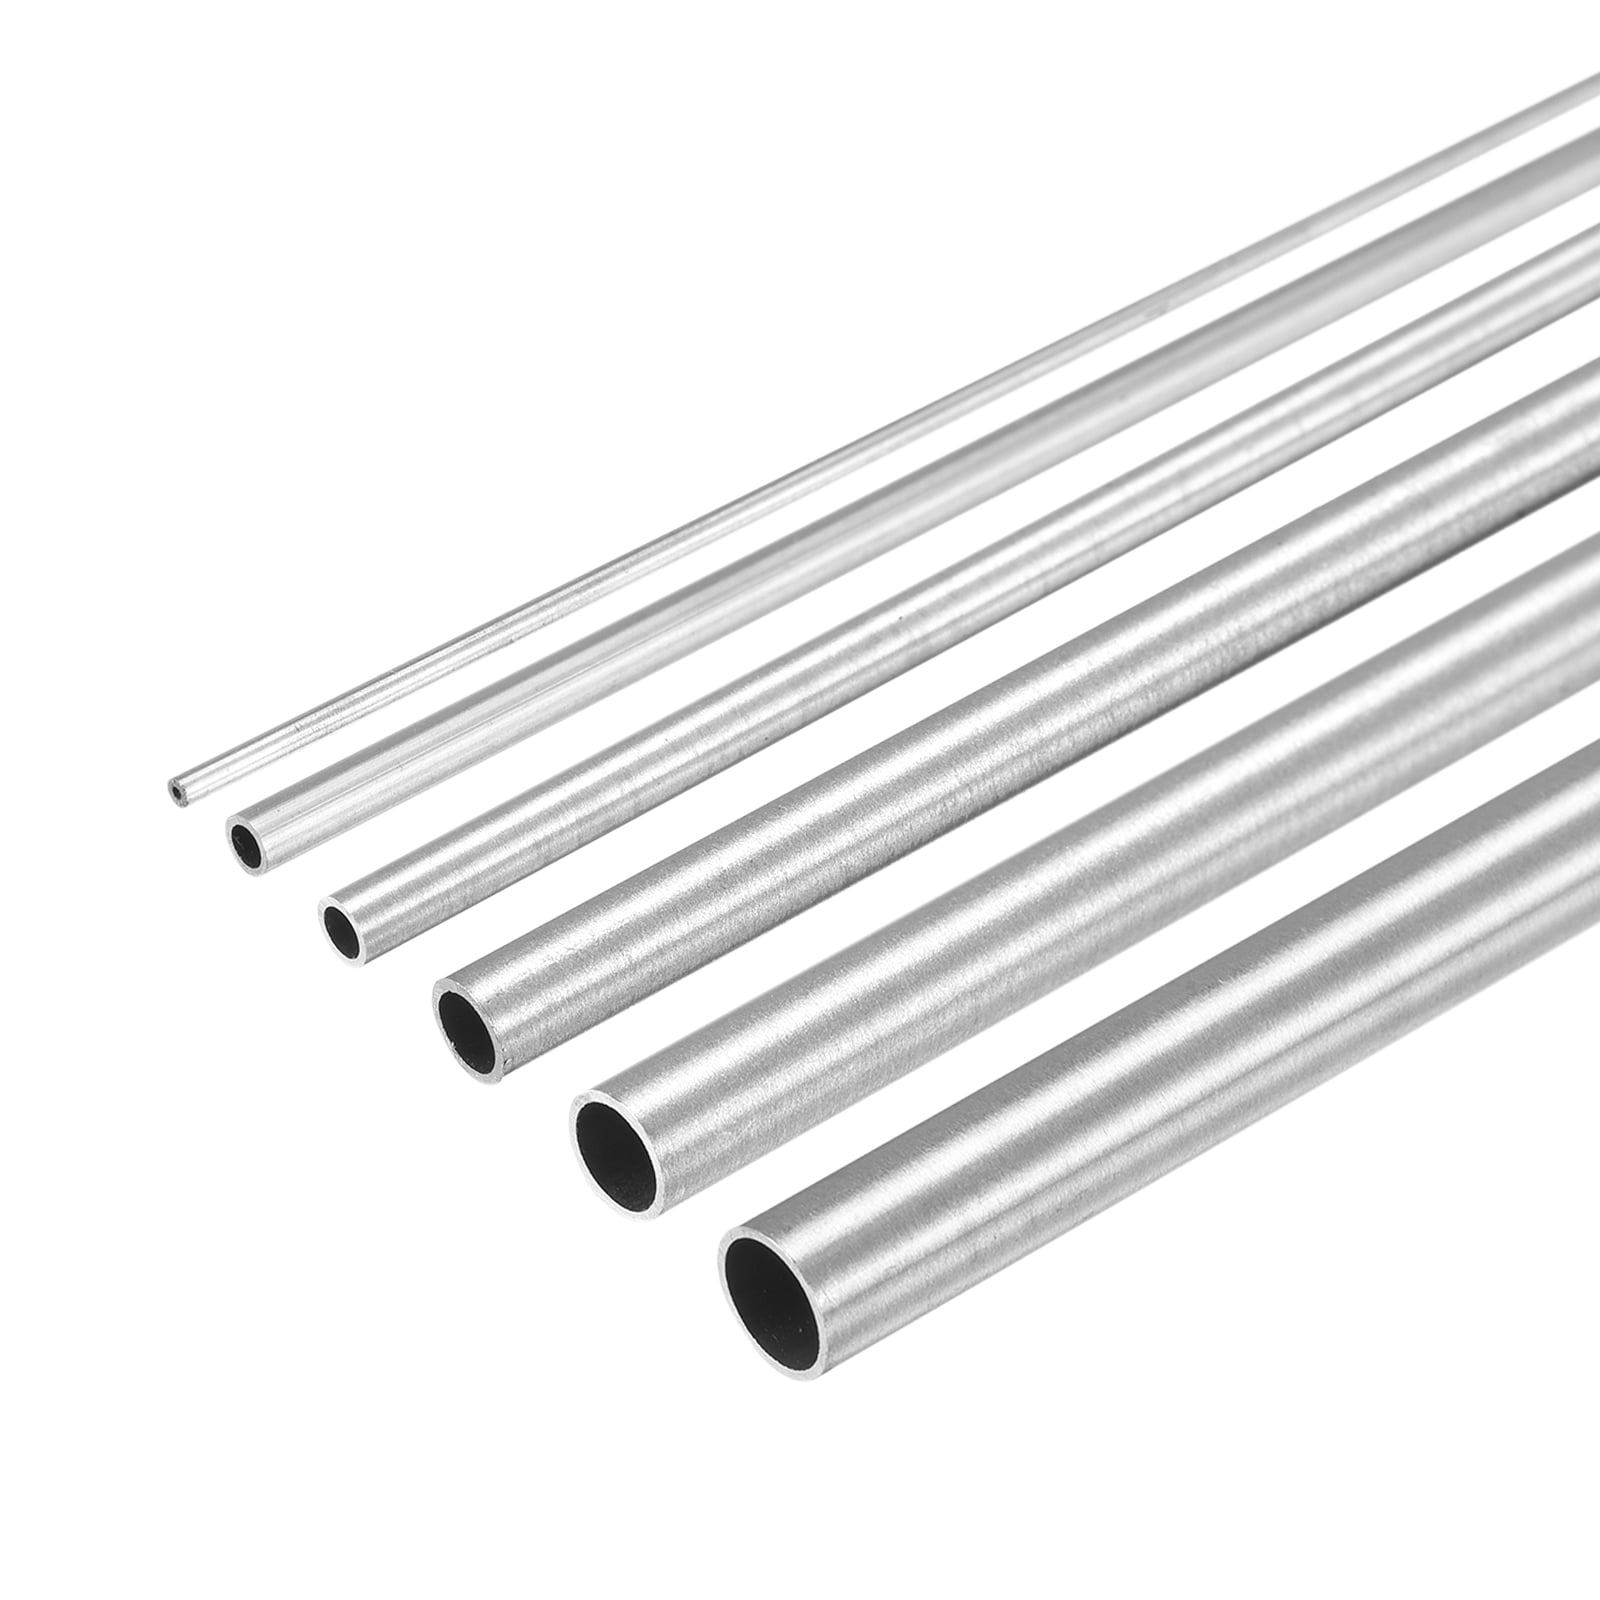 STAINLESS STEEL 304 6 MM OD X 1MM WALL ROUND TUBE ALL SIZES AVAILABLE FREE POST 